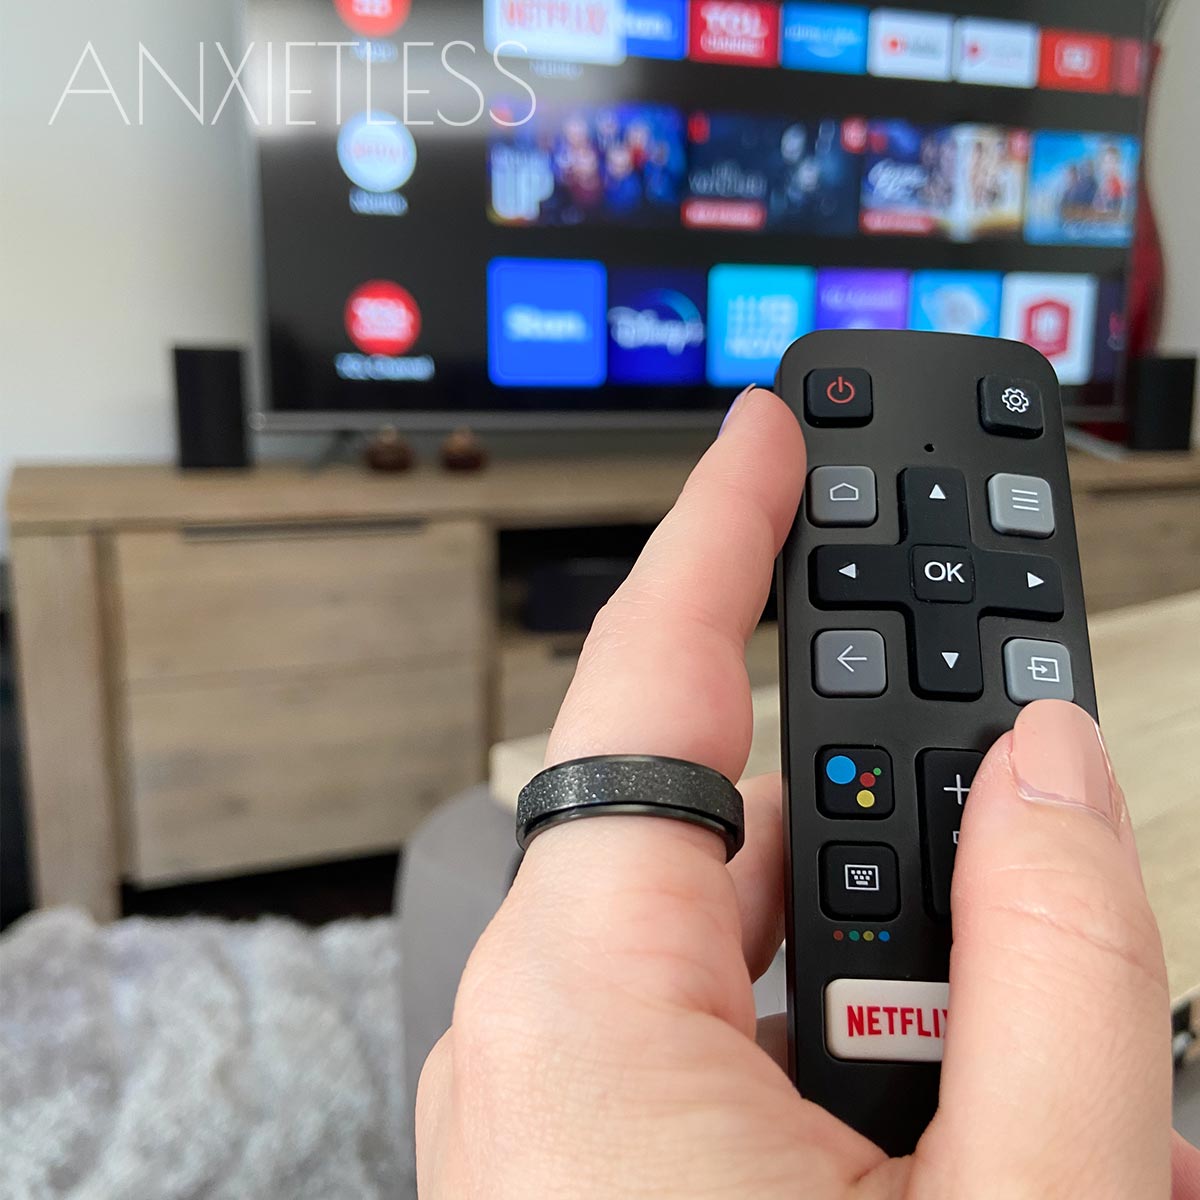 Woman wearing black anxiety ring on index finger, with a TV showing Netflix on the screen, and a TV stand in the background